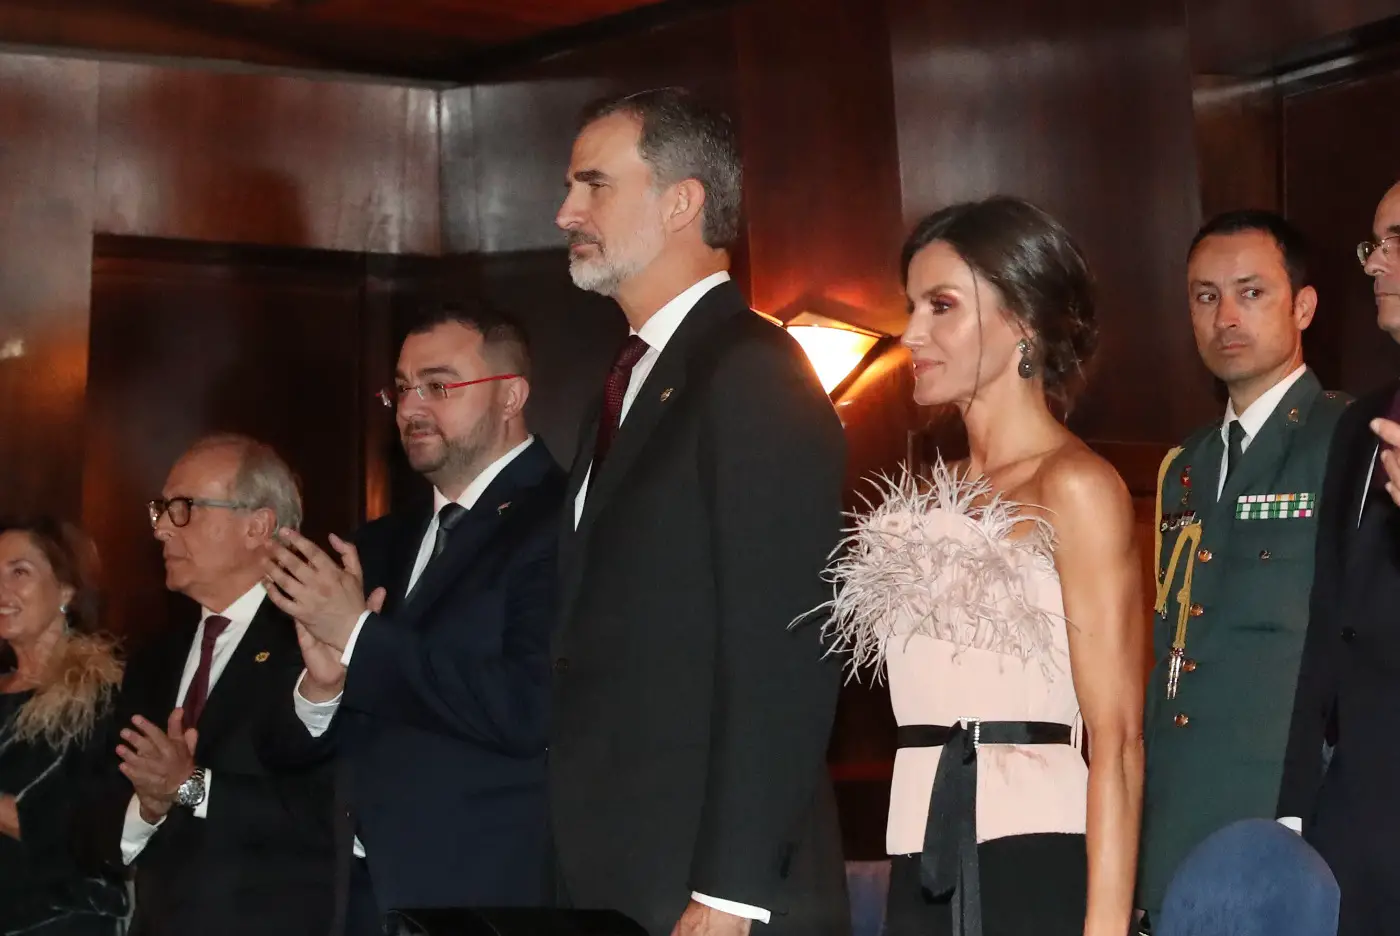 Queen Letizia dazzled in the 2nd skin top and pants at princess of asturias awards musical concert